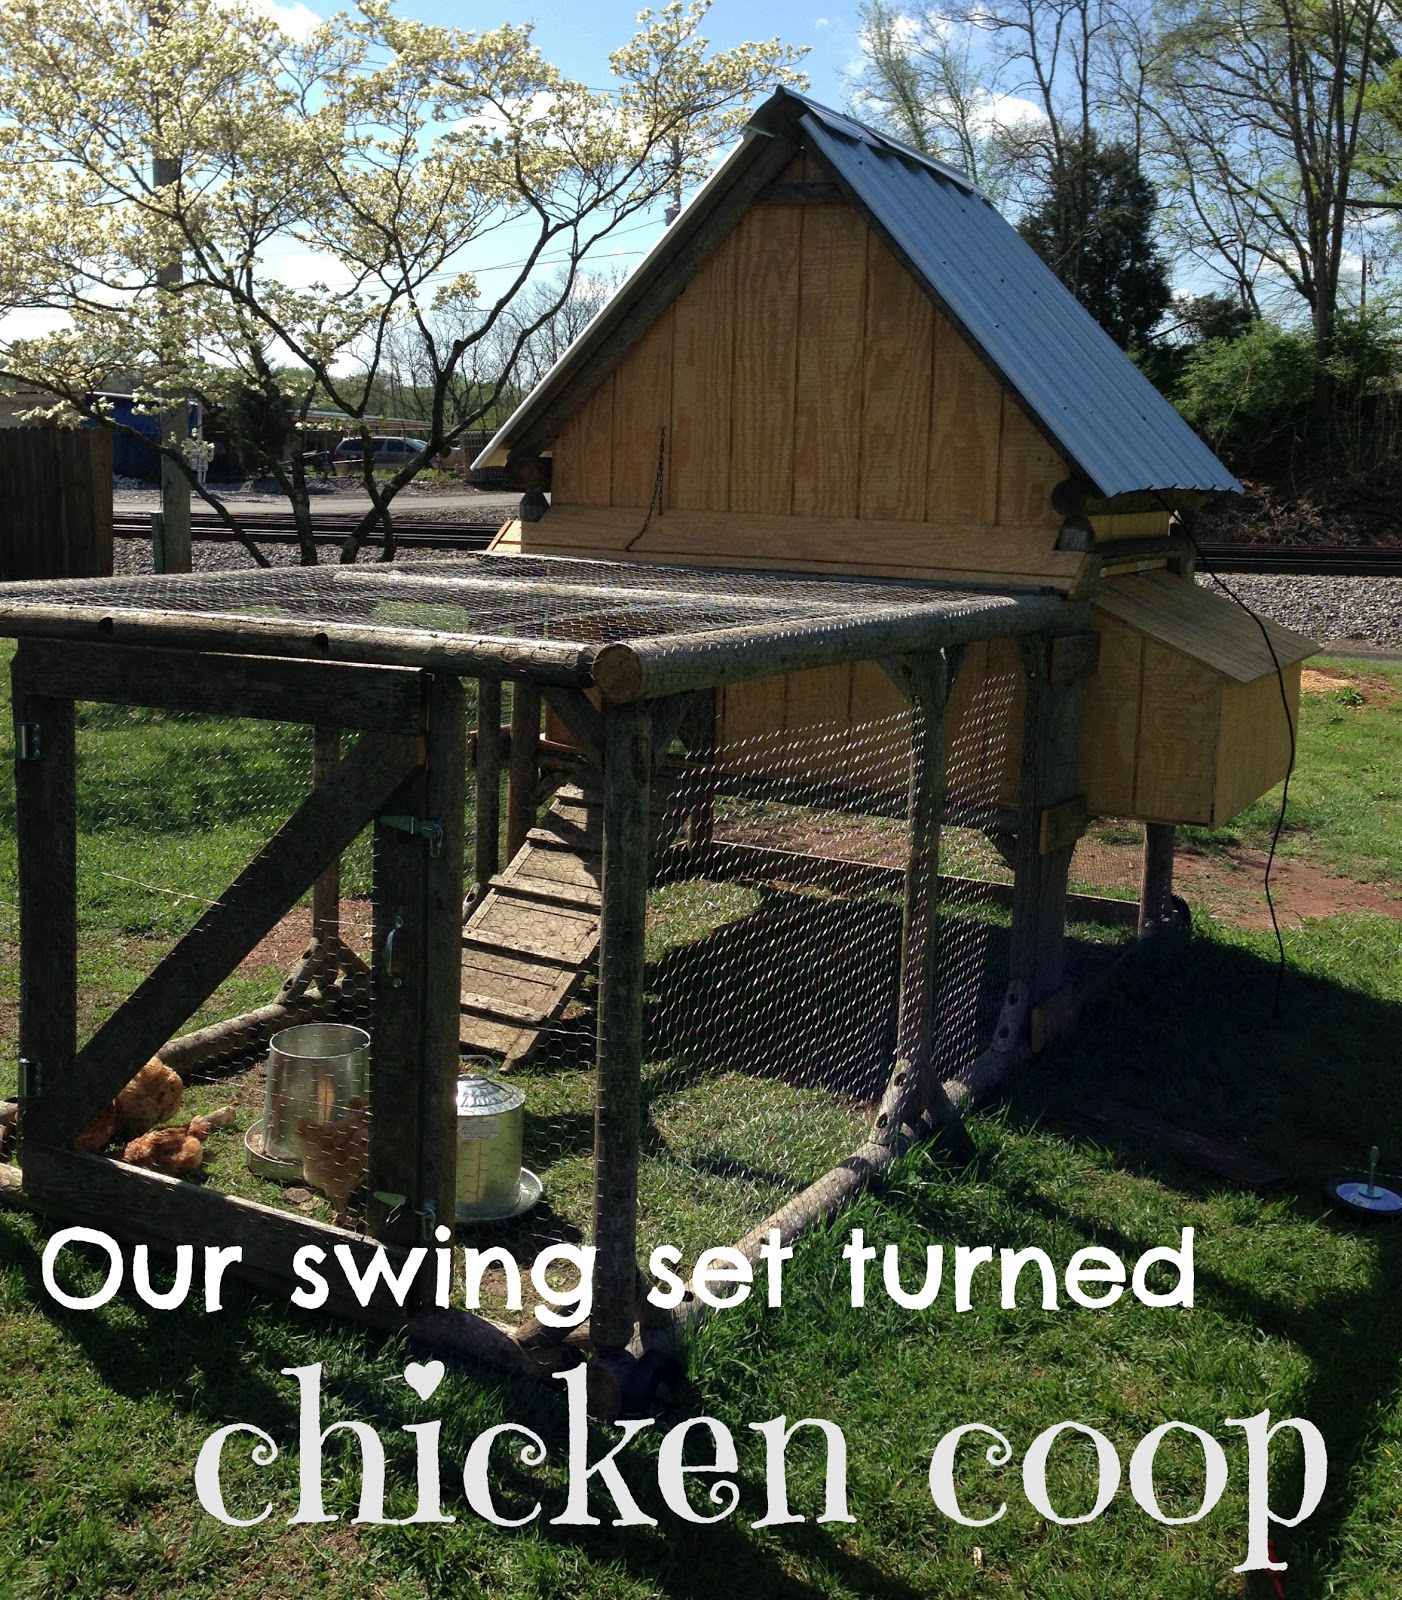 Our Swing-Set turned Chicken Coop! | His Mercy is New